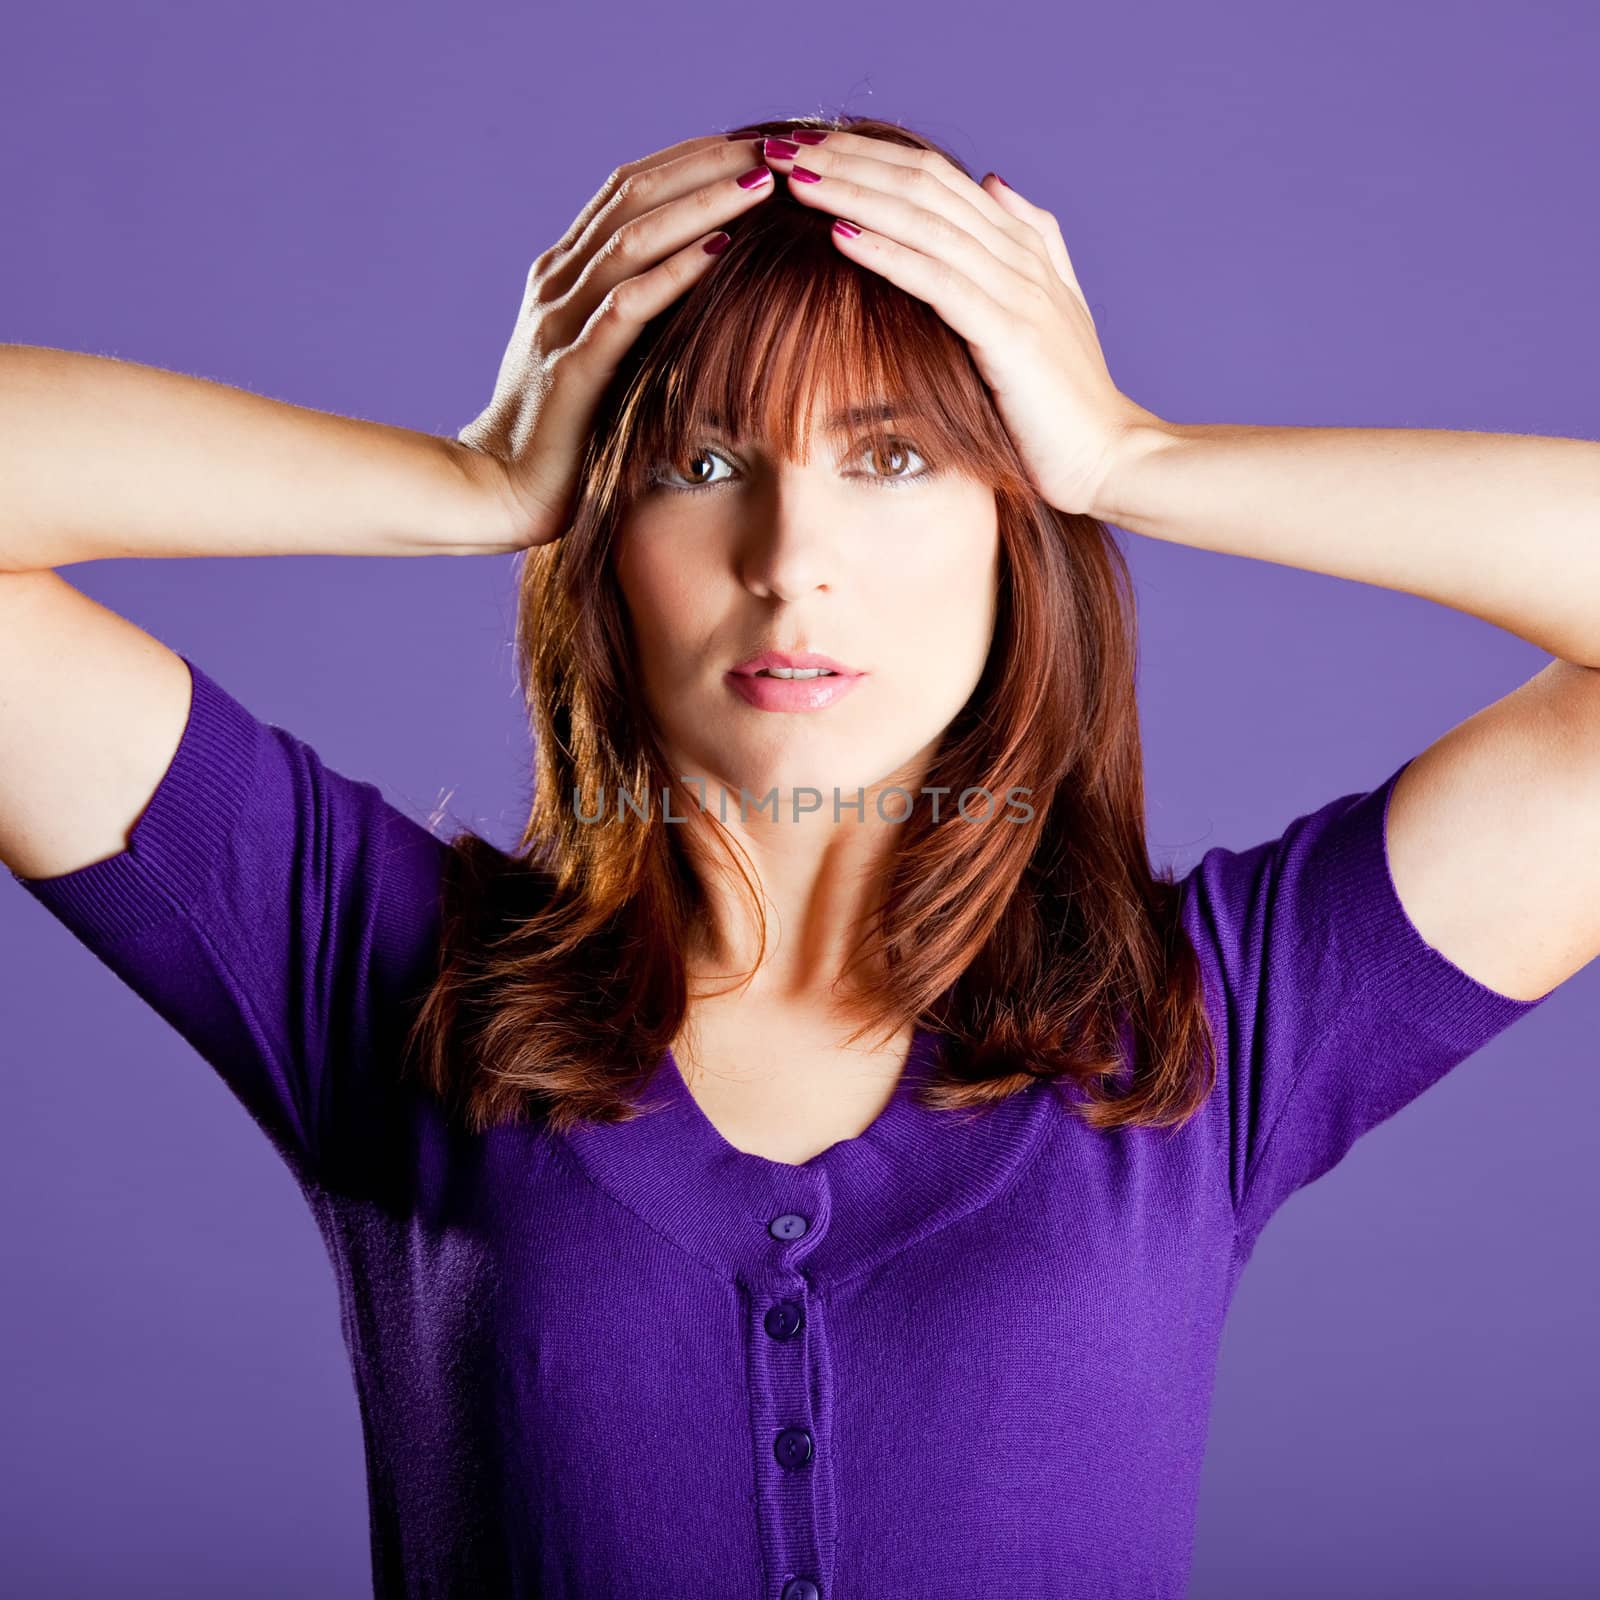 Portrait of a beautiful woman with a worried expression, over a violet background